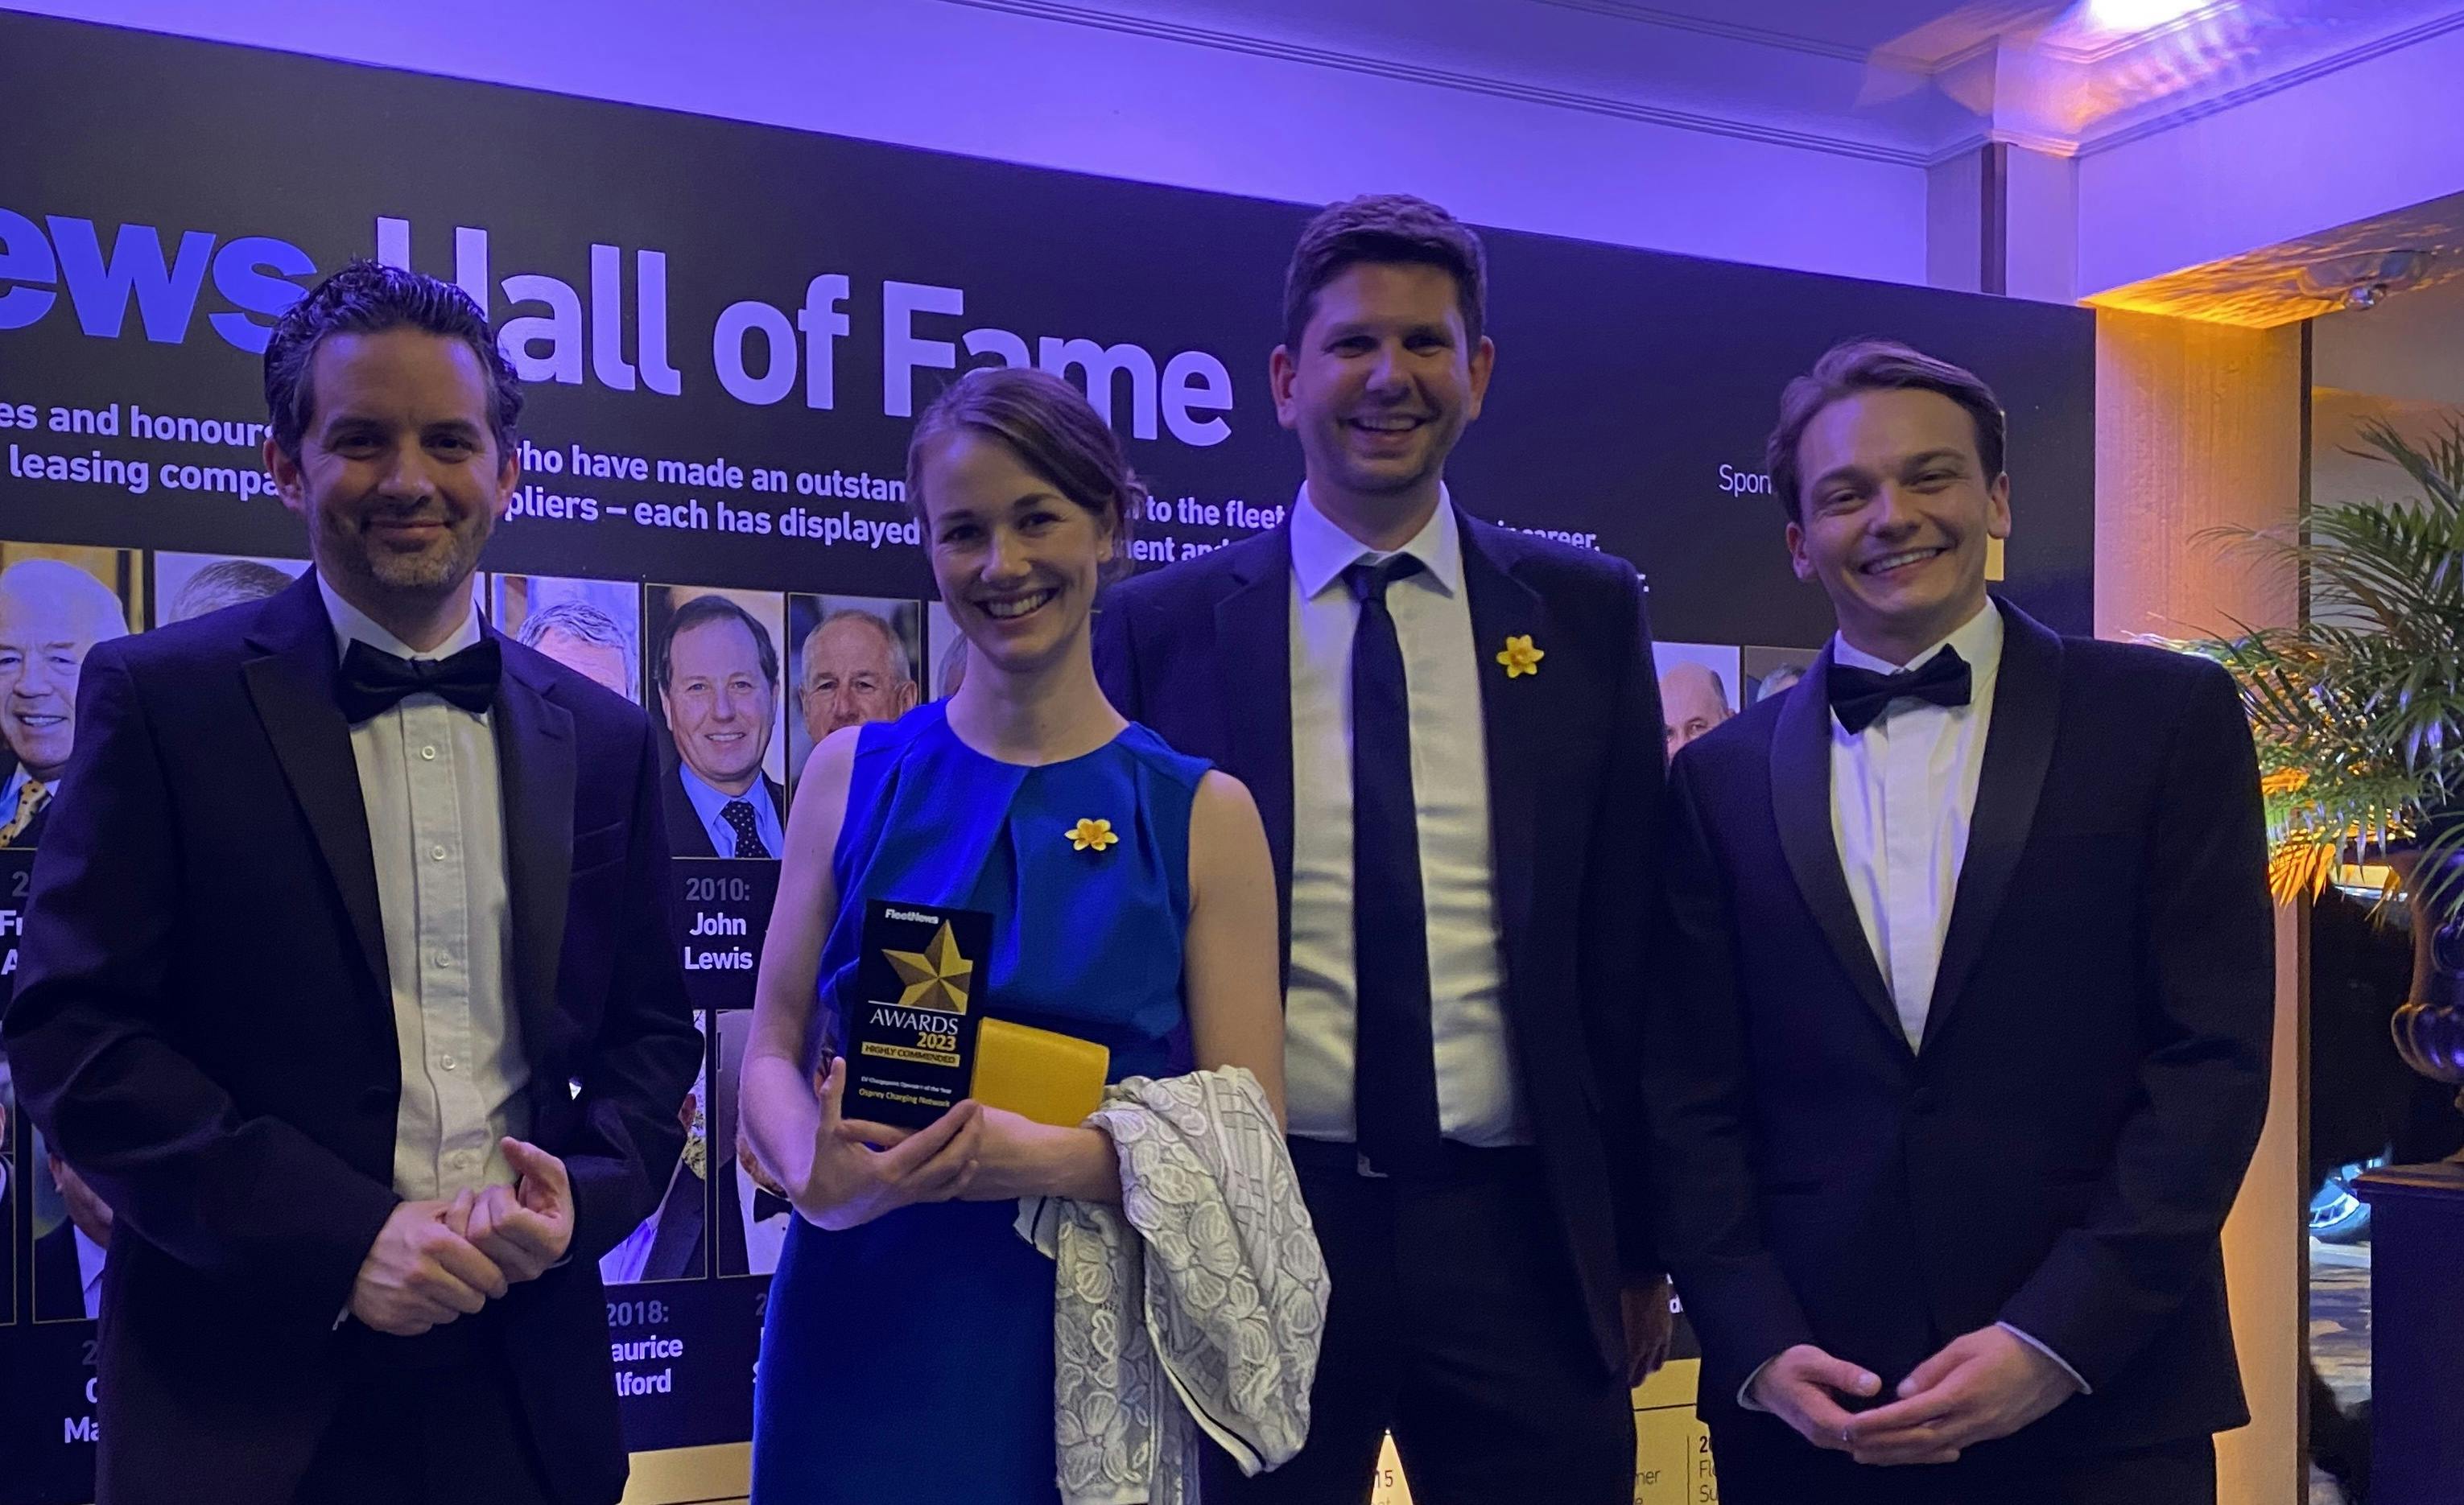 CEO, Ian Johnston, Head of Marketing Dora Clarke, Head of Product, Nicolas Mouazan and Commercial Strategy Lead, Harry Bleasdale pose with an award.